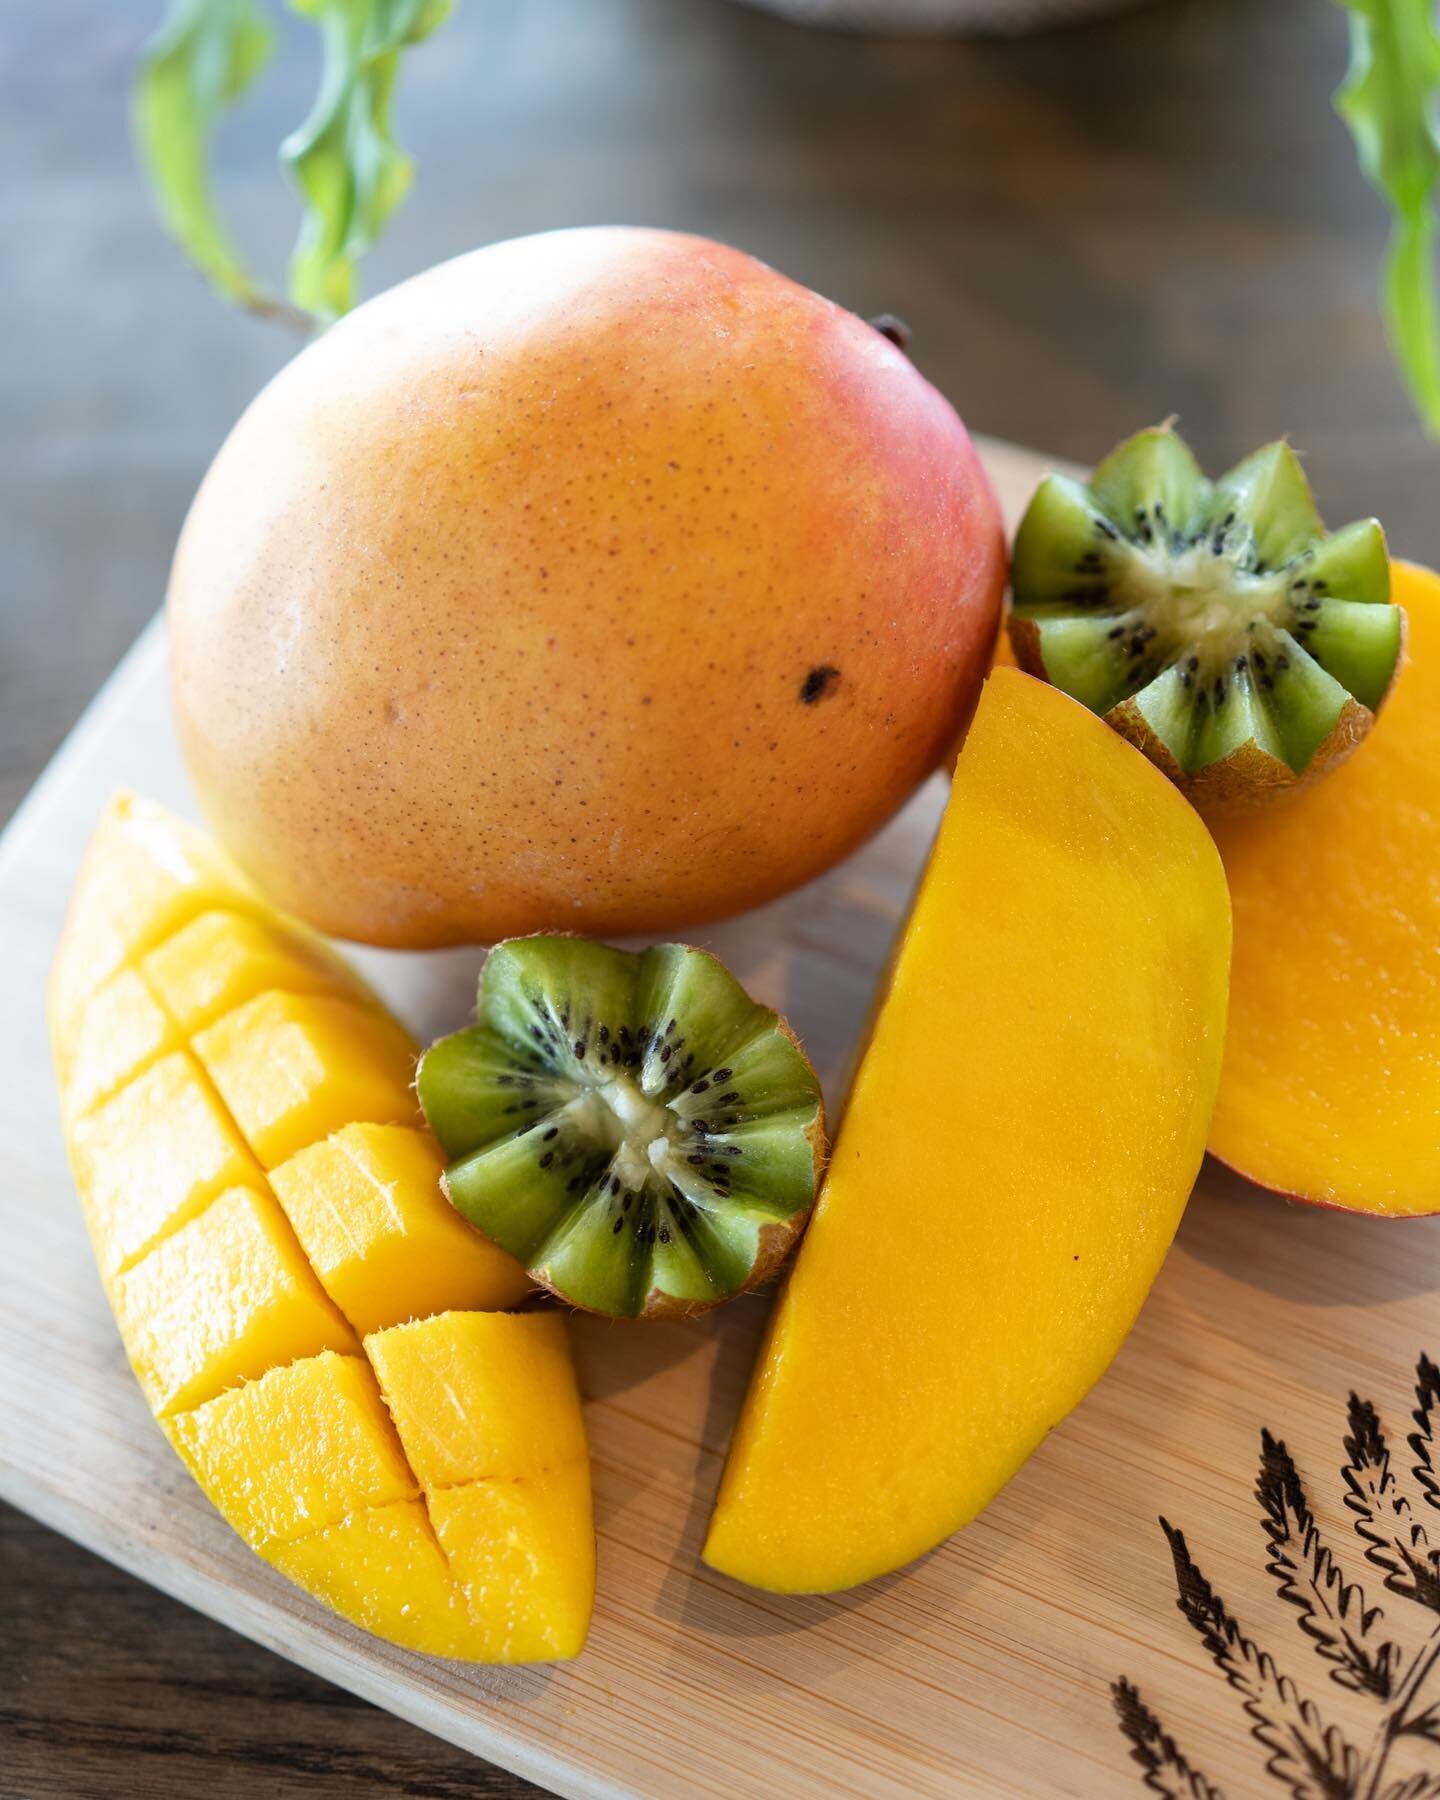 🥭 New Topping Alert! 🥭
We&rsquo;ve added Mango as a fresh-fruit topping to keep you cool during these hot summer days. Try some on your bowl the next time you stop by! ☀️
.
.
.
.
.
#smoothiebowl #freshingredients #fruit #eatwell #livewell